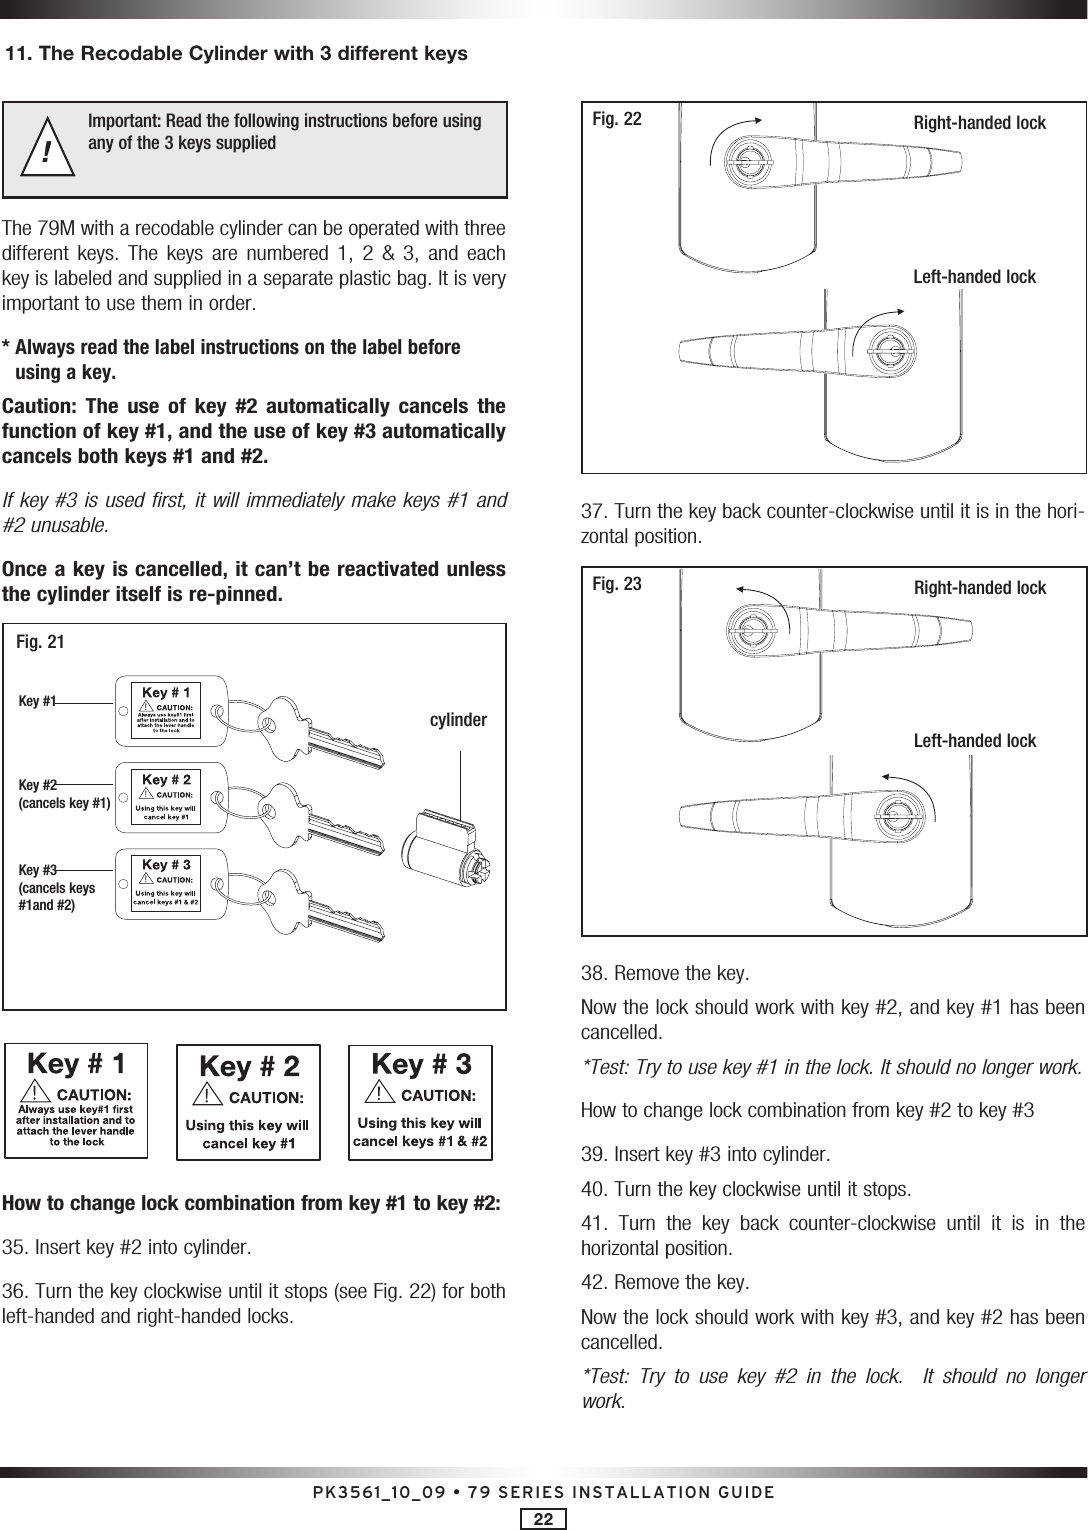 PK3561_10_09 • 79 SERIES INSTALLATION GUIDE22Important: Read the following instructions before using any of the 3 keys supplied !The 79M with a recodable cylinder can be operated with three different  keys.  The  keys  are  numbered  1,  2  &amp;  3,  and  each key is labeled and supplied in a separate plastic bag. It is very important to use them in order. *  Always read the label instructions on the label before using a key.Caution:  The  use  of  key  #2  automatically  cancels  the function of key #1, and the use of key #3 automatically cancels both keys #1 and #2.If key #3 is used first, it will immediately make keys #1 and #2 unusable. Once a key is cancelled, it can’t be reactivated unless the cylinder itself is re-pinned.   Fig. 21Key #1Key #2 (cancels key #1)Key #3 (cancels keys  #1and #2)cylinder         How to change lock combination from key #1 to key #2:35. Insert key #2 into cylinder. 36. Turn the key clockwise until it stops (see Fig. 22) for both left-handed and right-handed locks.Right-handed lockLeft-handed lockFig. 2237. Turn the key back counter-clockwise until it is in the hori-zontal position.Fig. 23 Right-handed lockLeft-handed lock38. Remove the key.Now the lock should work with key #2, and key #1 has been cancelled.*Test: Try to use key #1 in the lock. It should no longer work.How to change lock combination from key #2 to key #339. Insert key #3 into cylinder.40. Turn the key clockwise until it stops.41.  Turn  the  key  back  counter-clockwise  until  it  is  in  the  horizontal position.42. Remove the key.Now the lock should work with key #3, and key #2 has been cancelled.*Test:  Try  to  use  key  #2  in  the  lock.    It  should  no  longer work.11. The Recodable Cylinder with 3 different keys